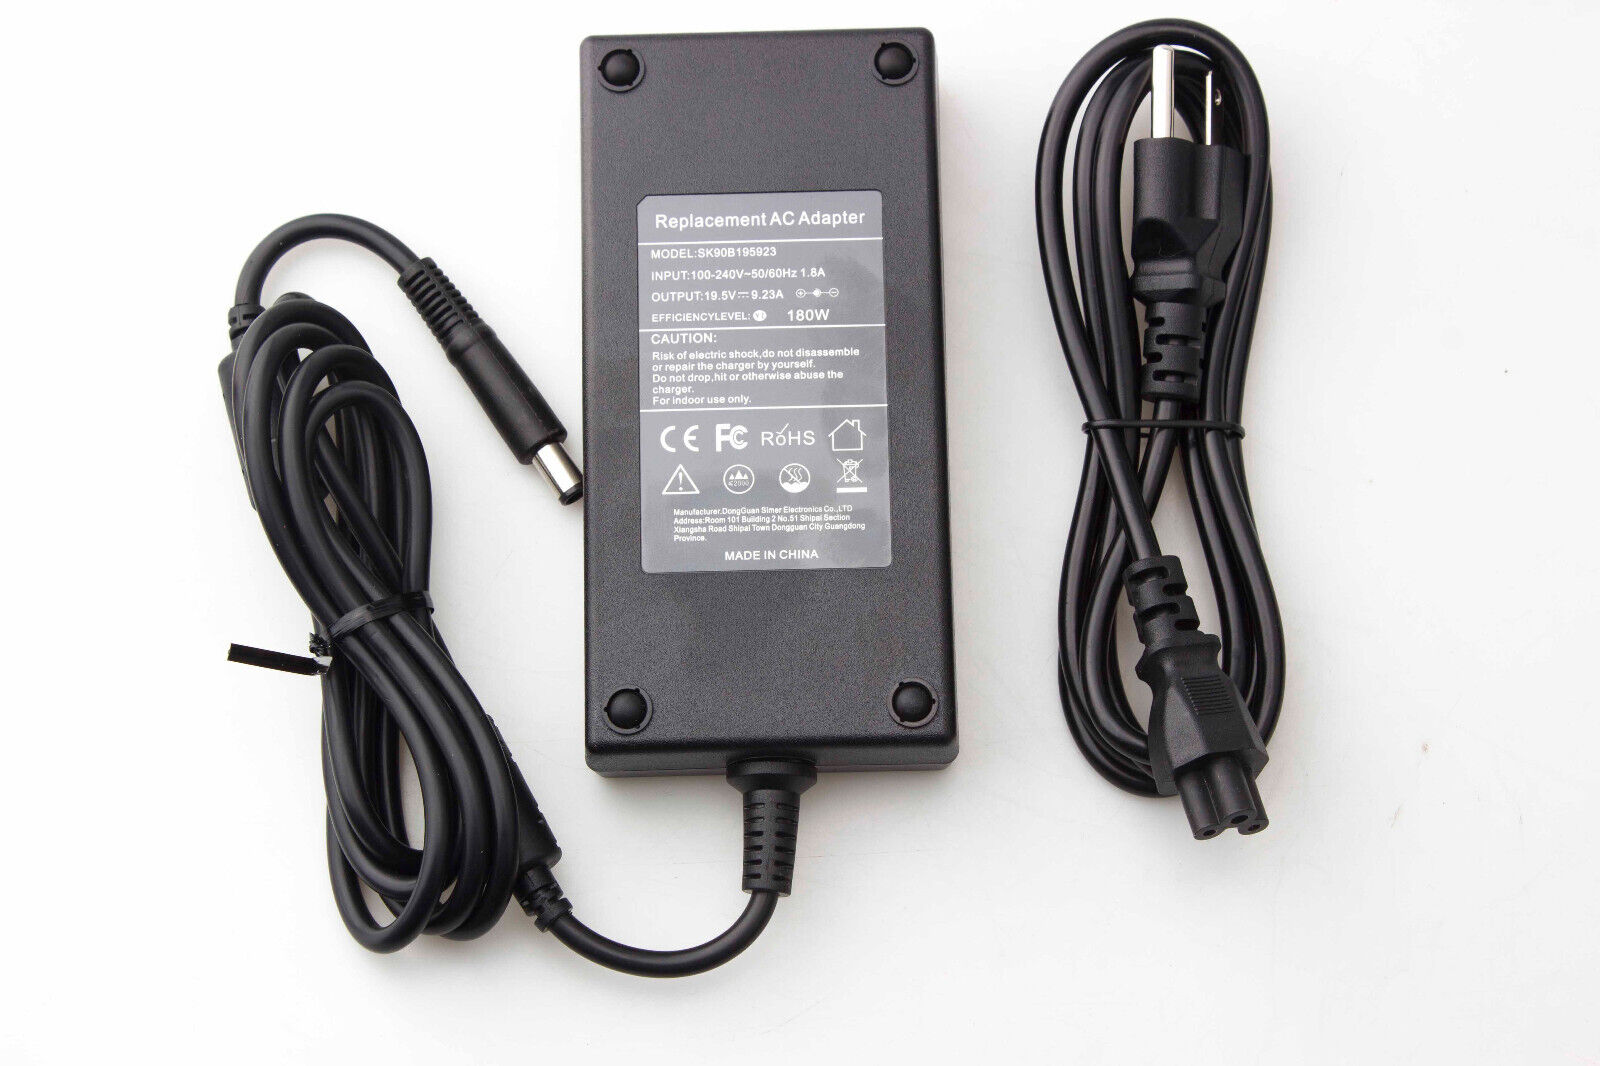 180W 19.5V 9.23A Laptop Charger For Dell G3 G5 G7 Gaming Laptop 3779 5590 7790